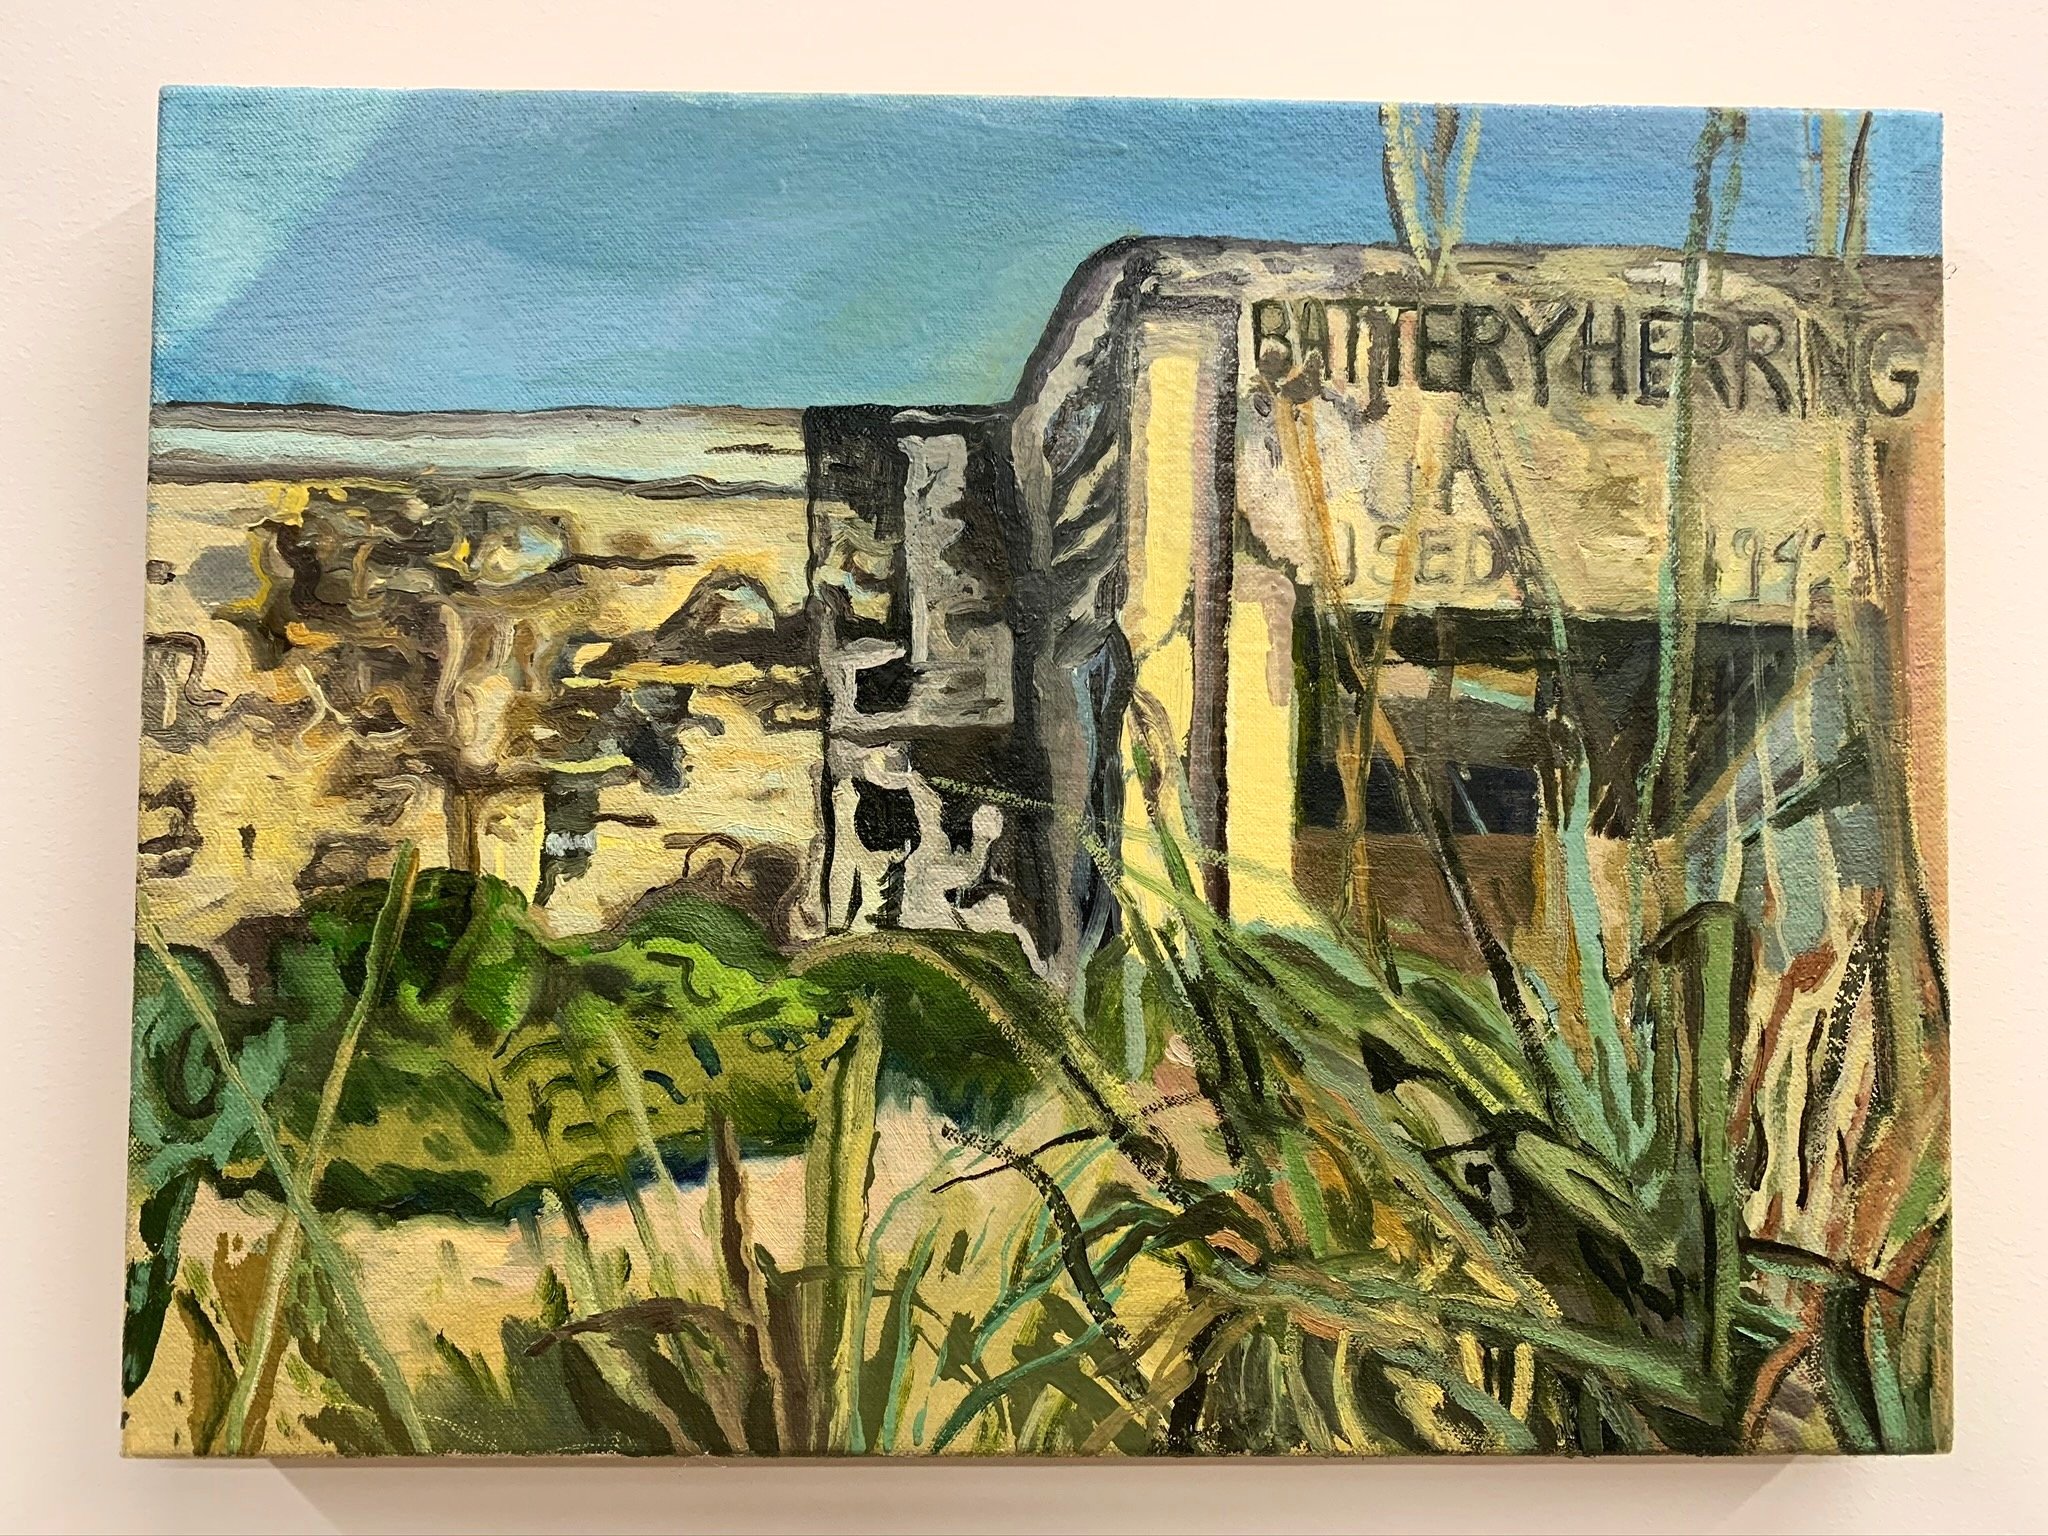 Battery, 2020, oil on canvas, 14 x 18 inches